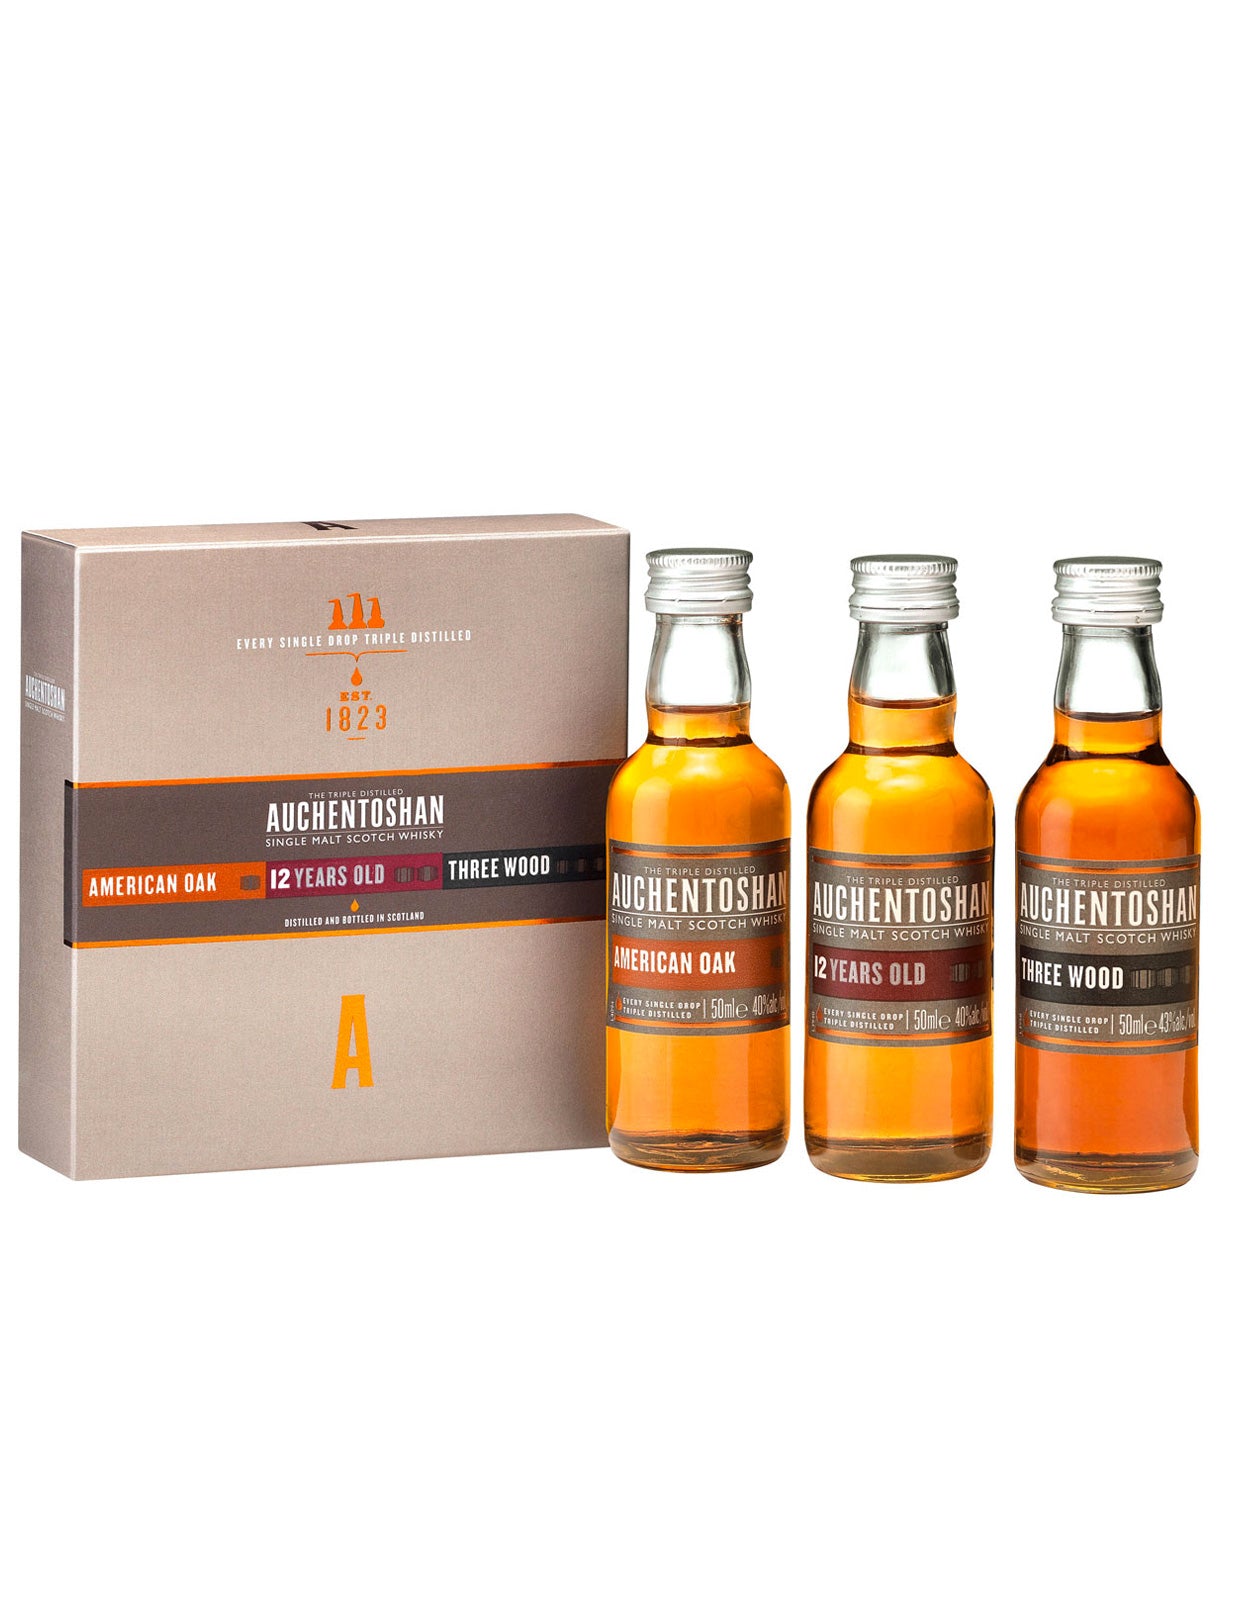 Auchentoshan The Gift Collection - 3 Pack